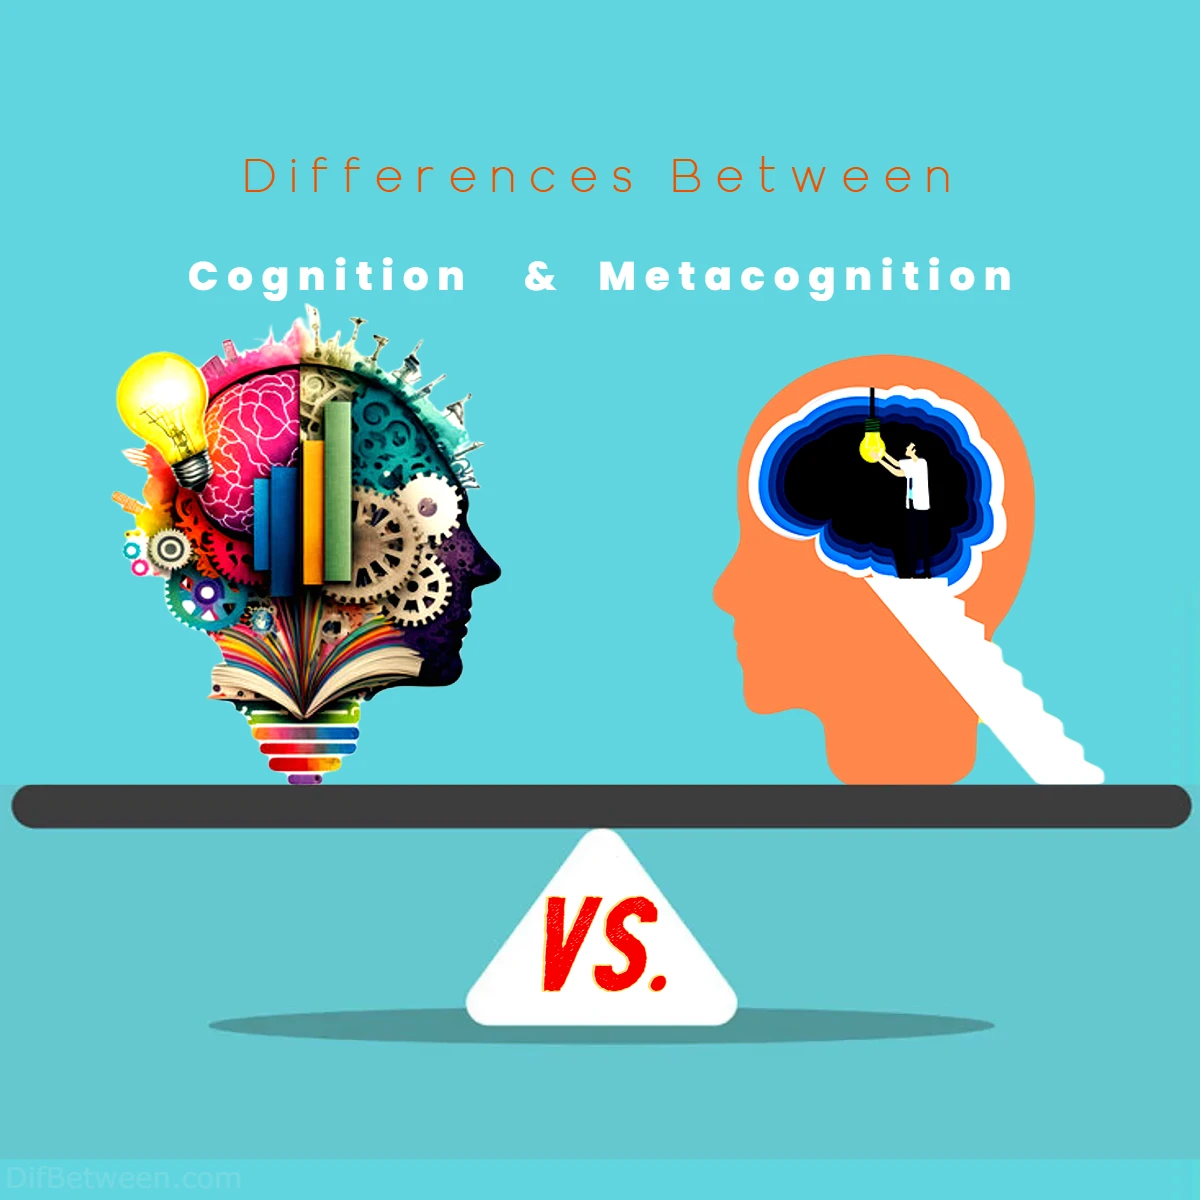 Differences Between Cognition vs Metacognition